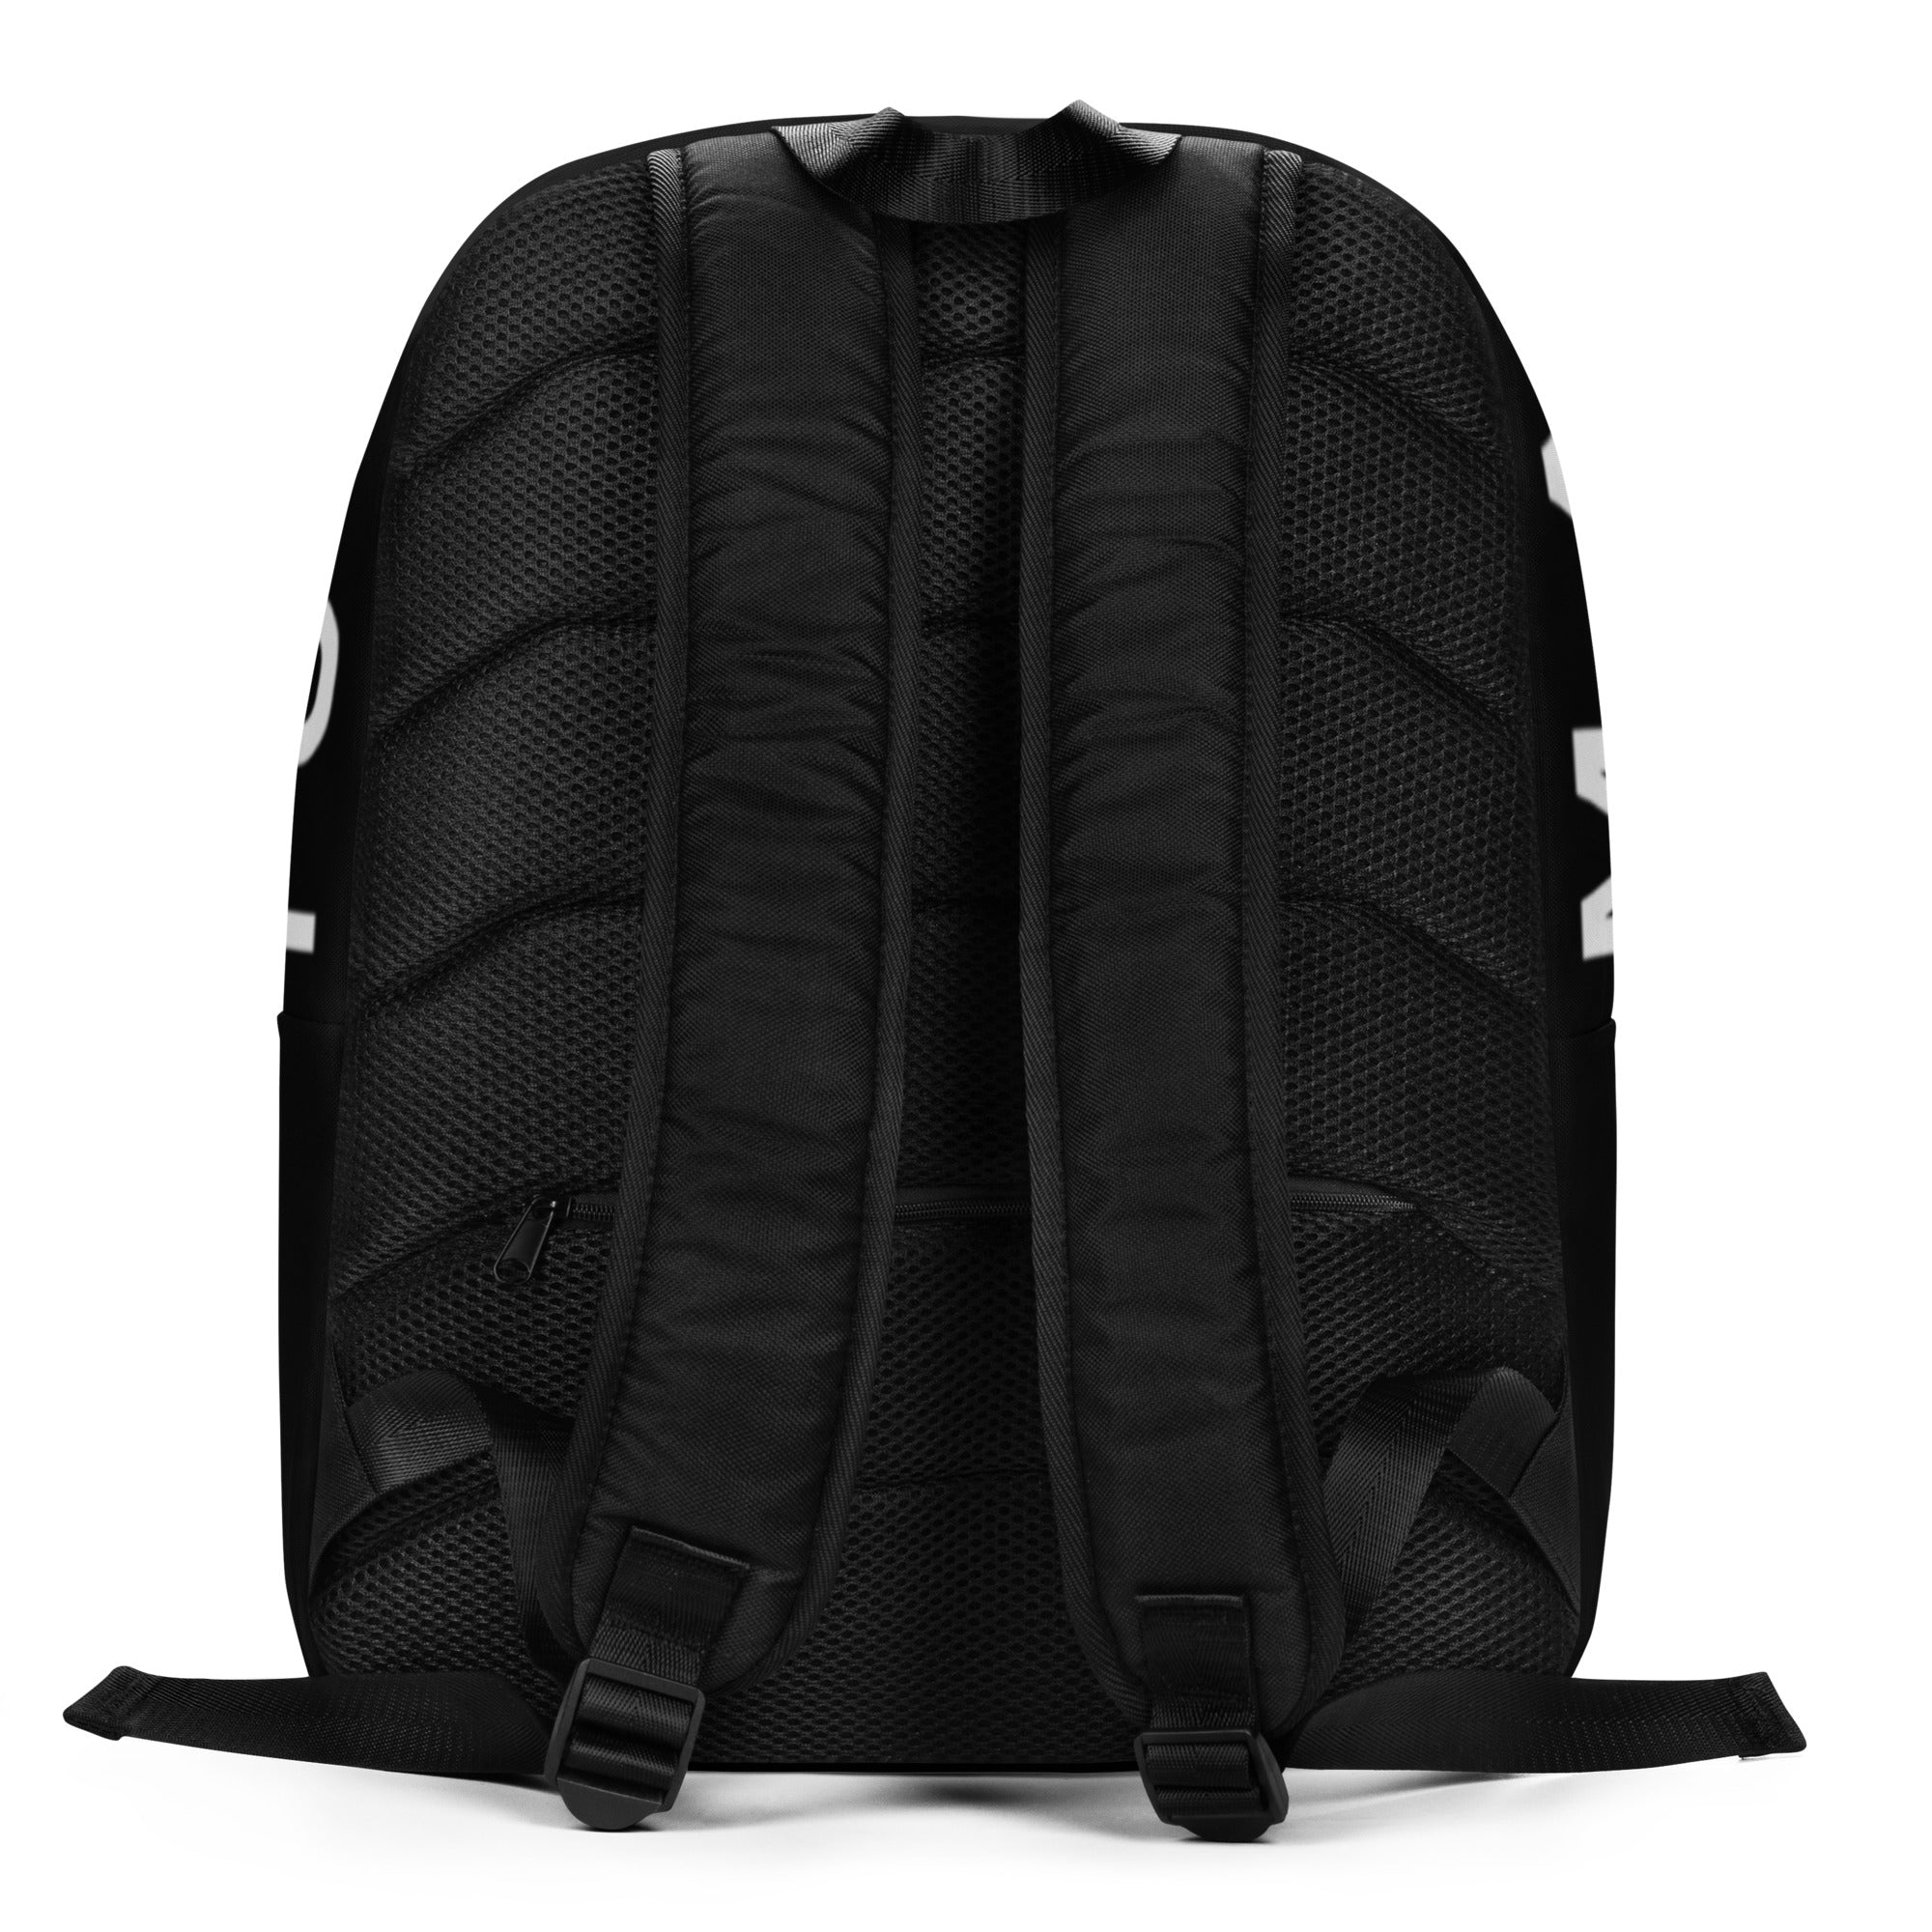 Suns Out Guns Out. Dura-Light Backpack